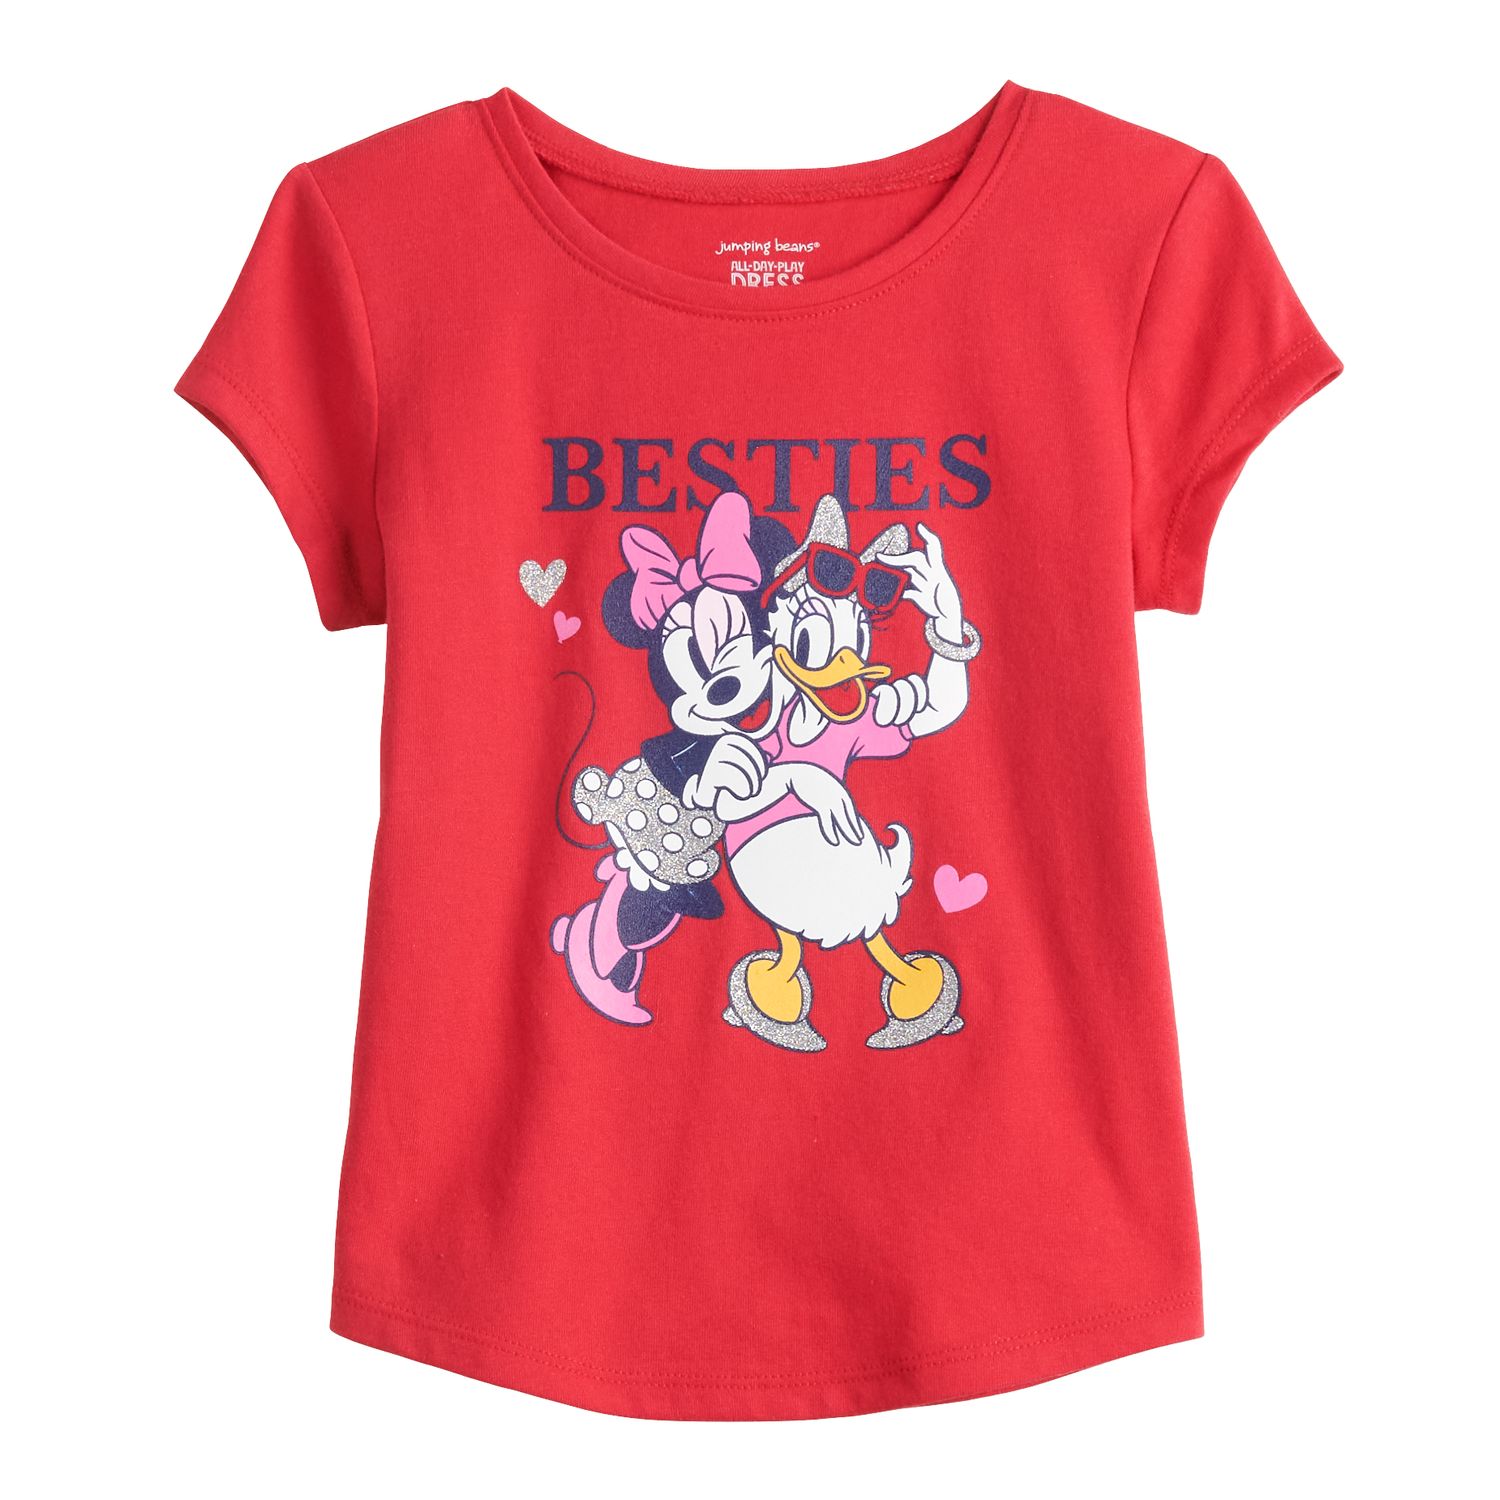 Image for Disney/Jumping Beans Disney's Minnie Mouse Toddler Girl Shirttail Tee by Jumping Beans® at Kohl's.